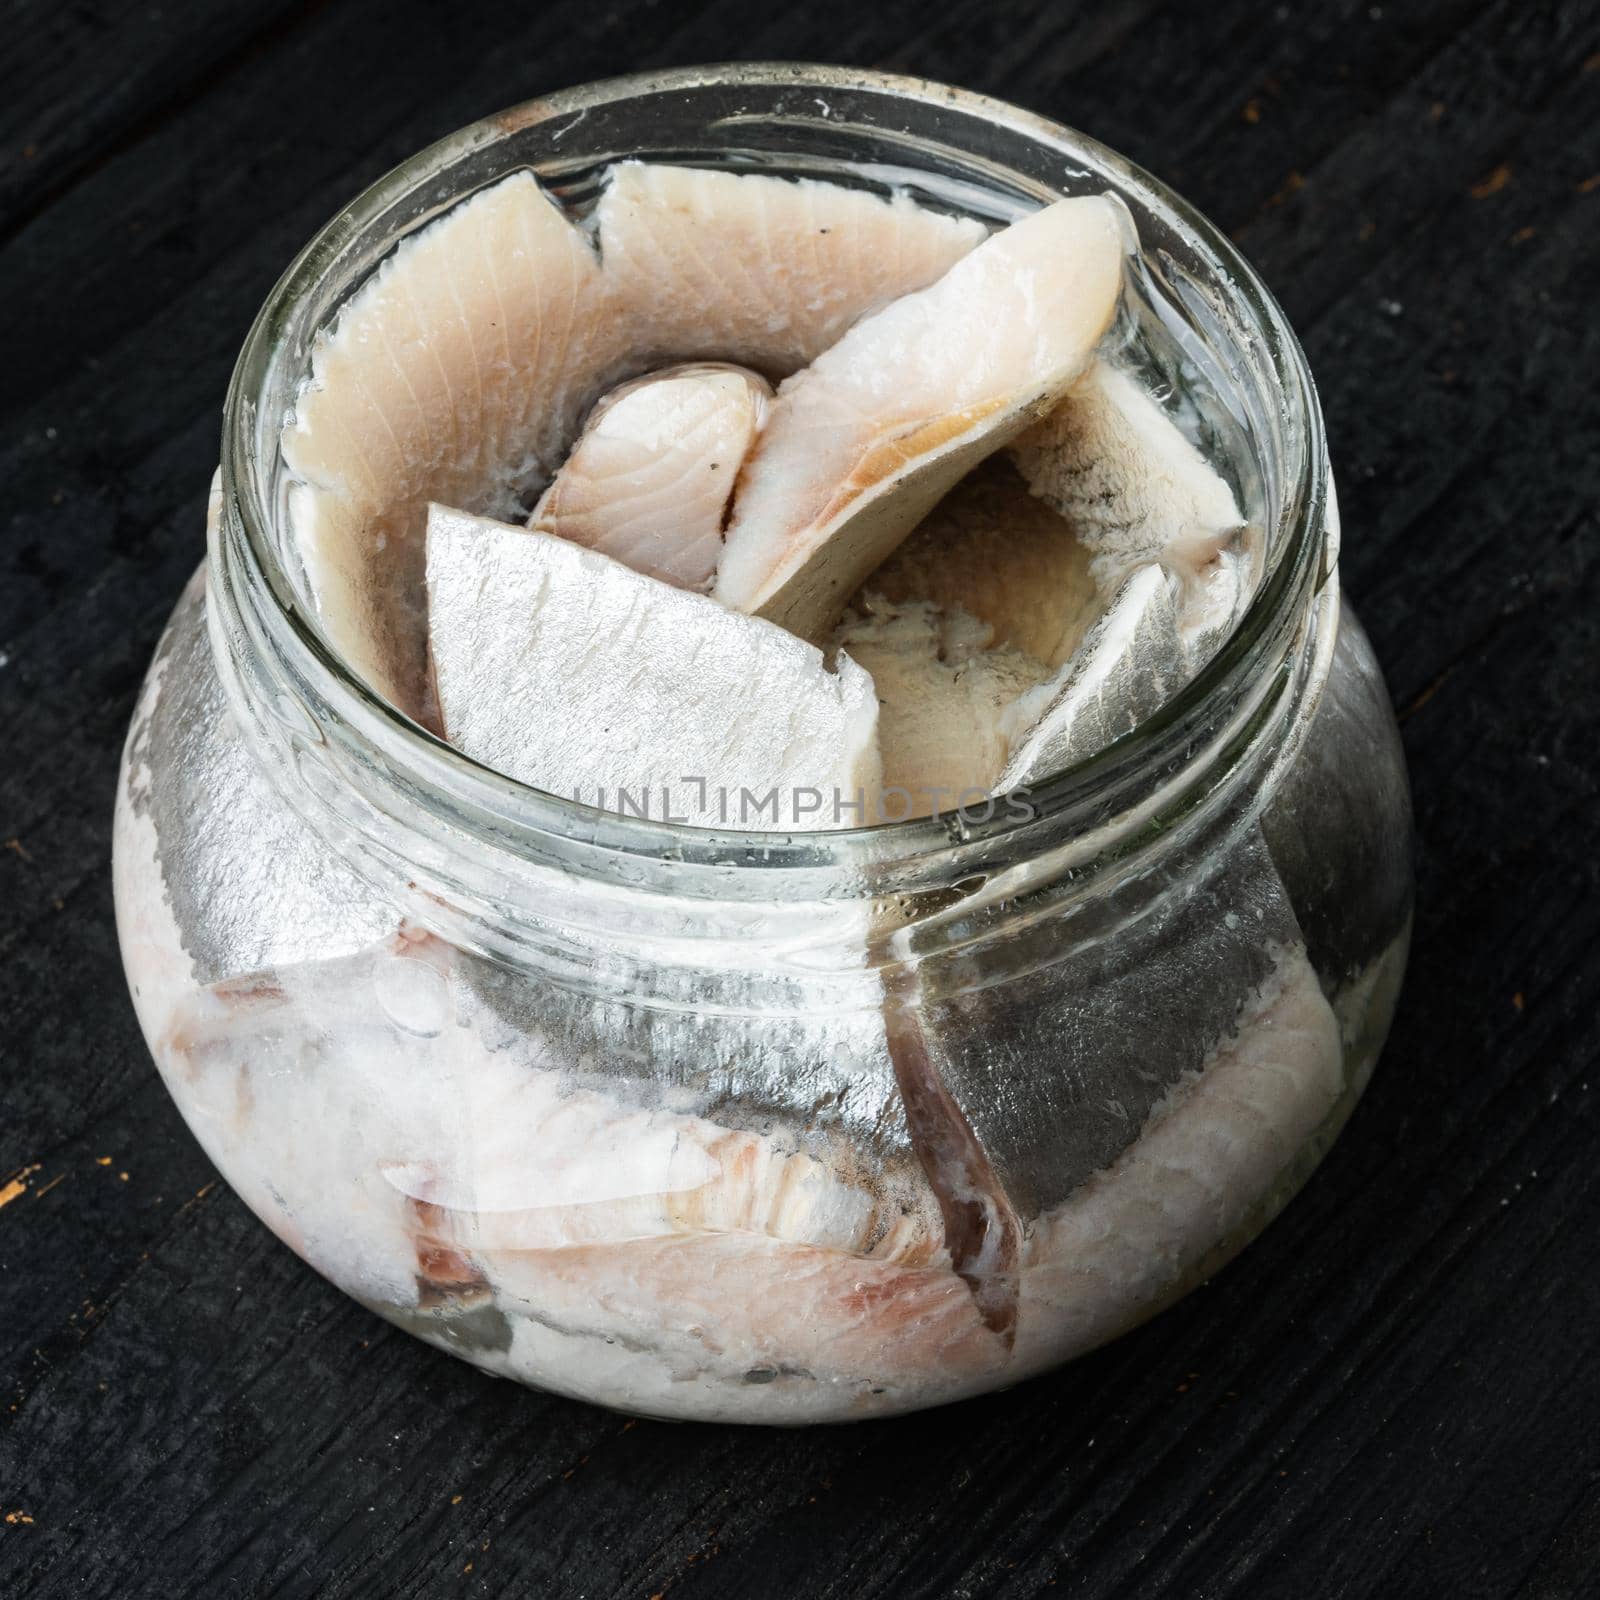 Pickled herring, in glass jar, on black wooden table background, square format by Ilianesolenyi